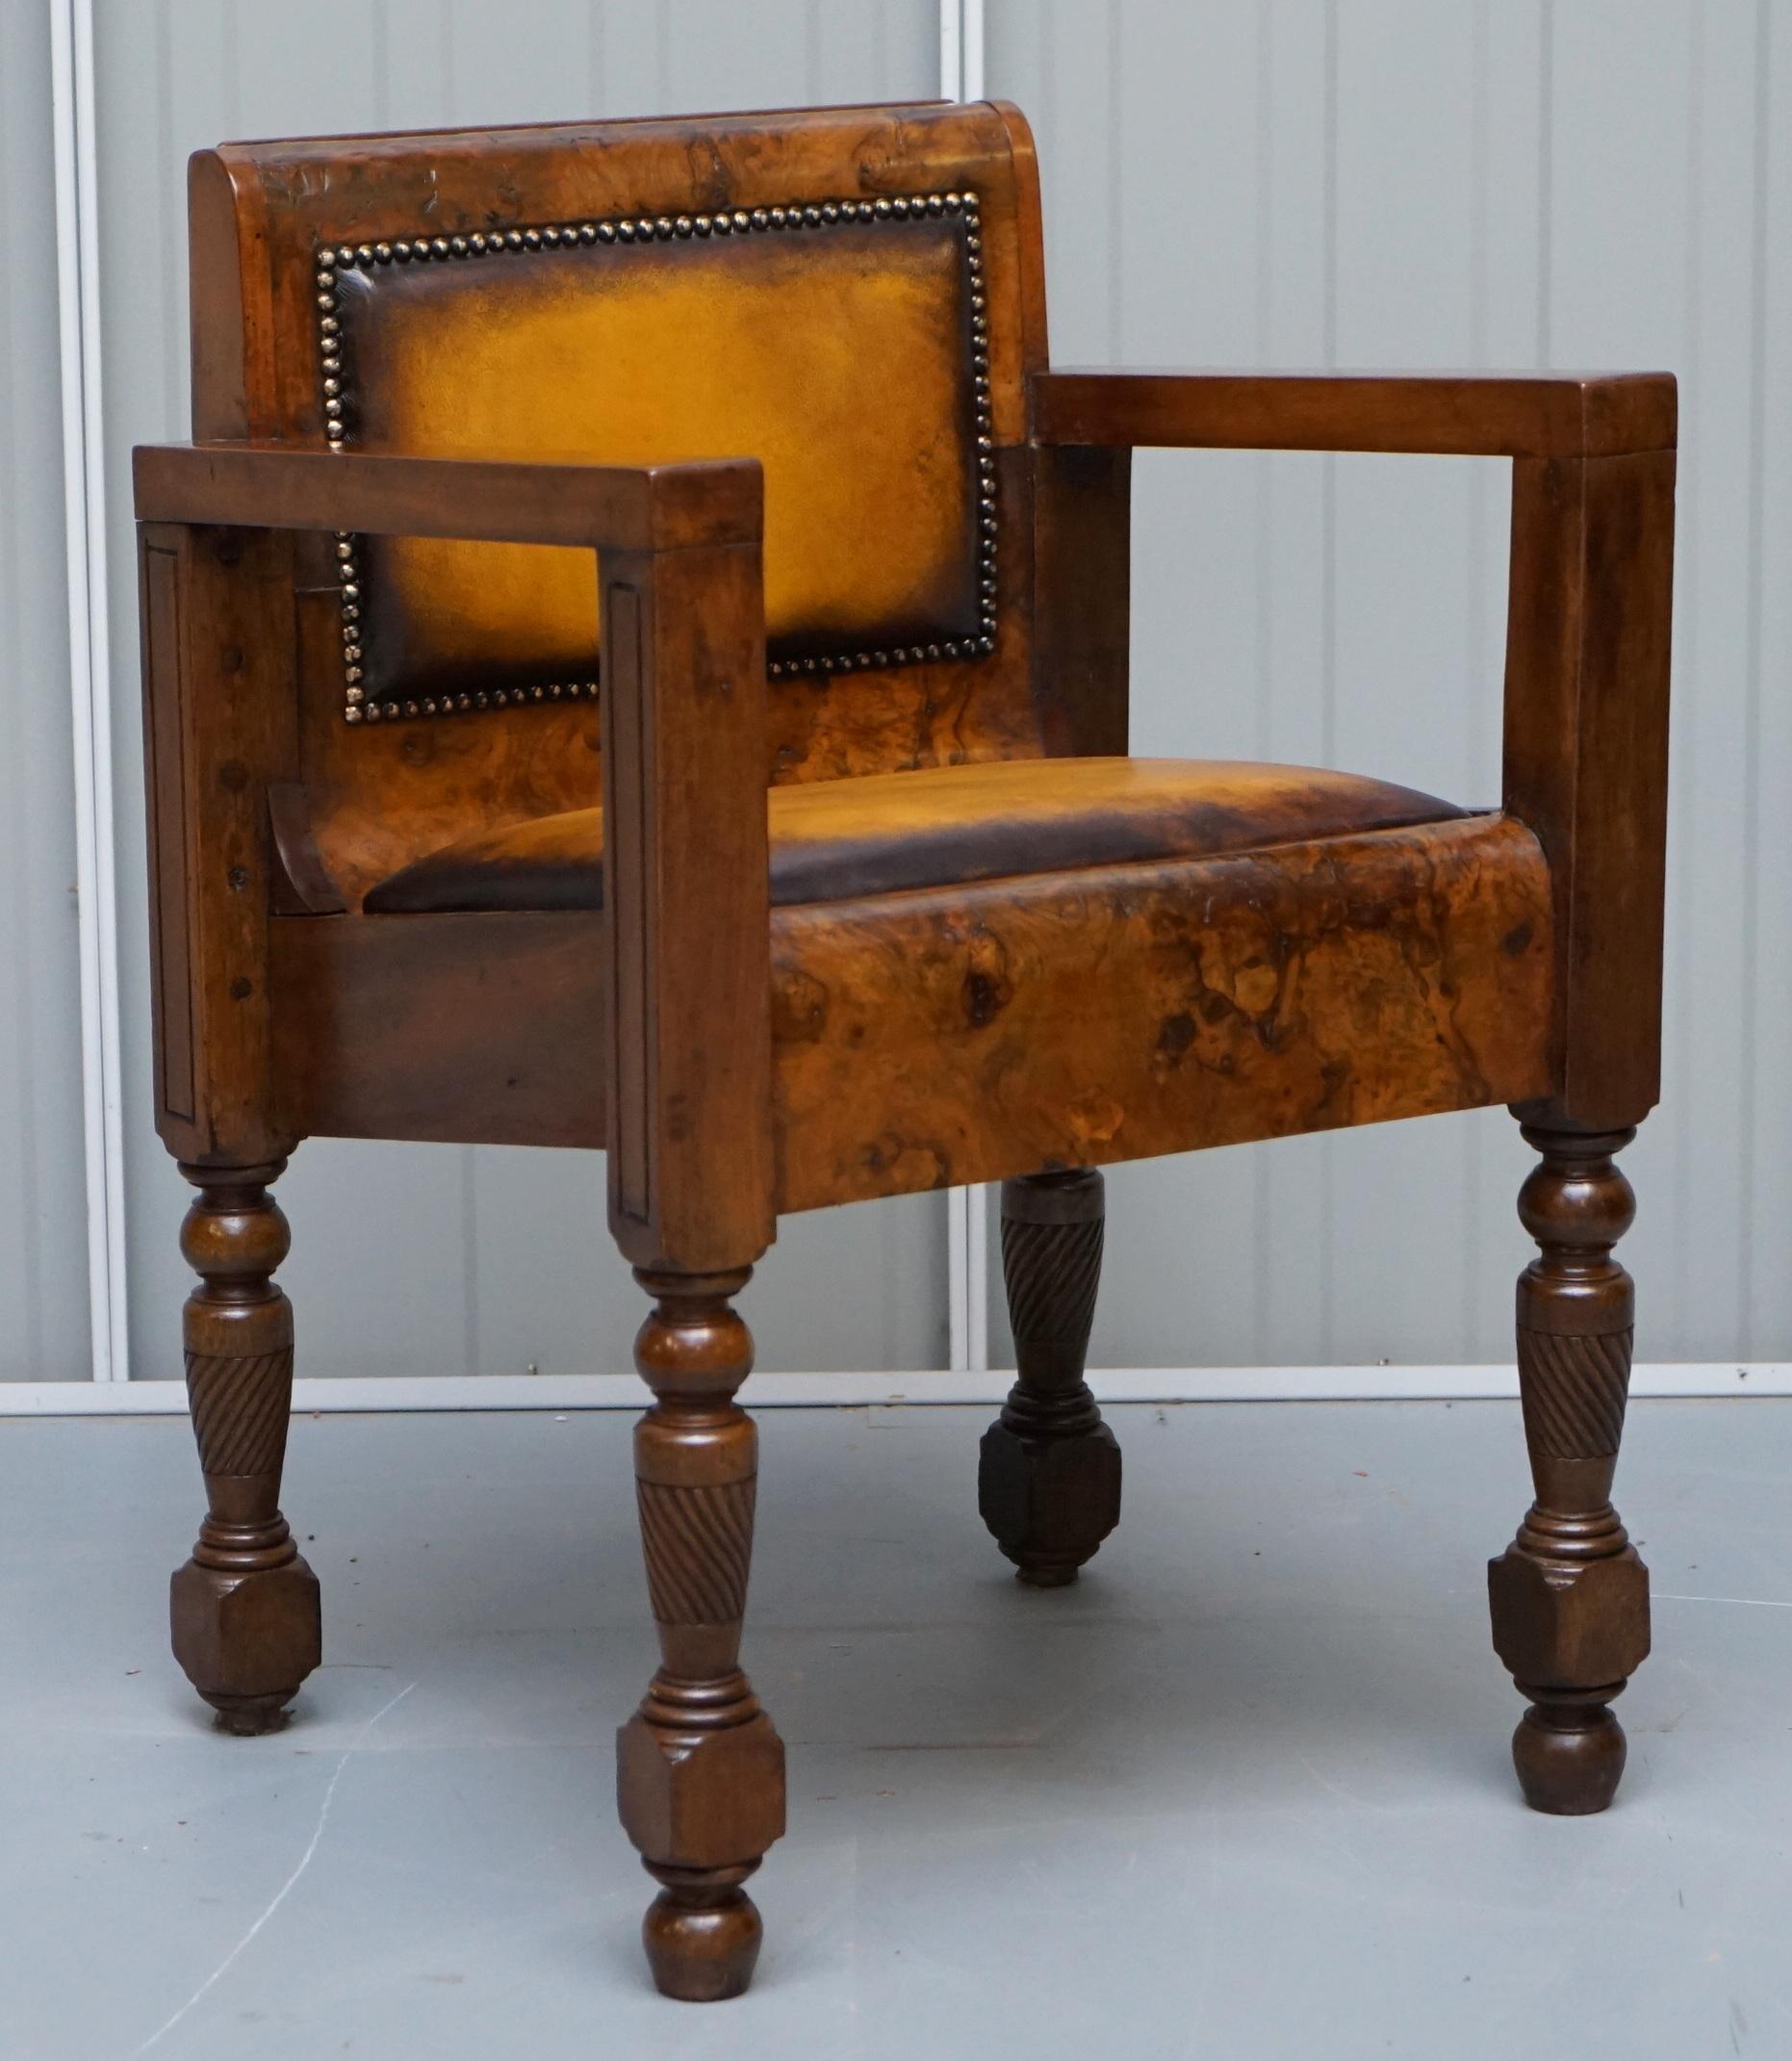 We are delighted to offer for sale this lovely fully restored handmade in England Art Deco burl walnut desk chair with brown leather upholstery

A very rare and comfortable armchair which has been fully restored. The restoration is as follows, the